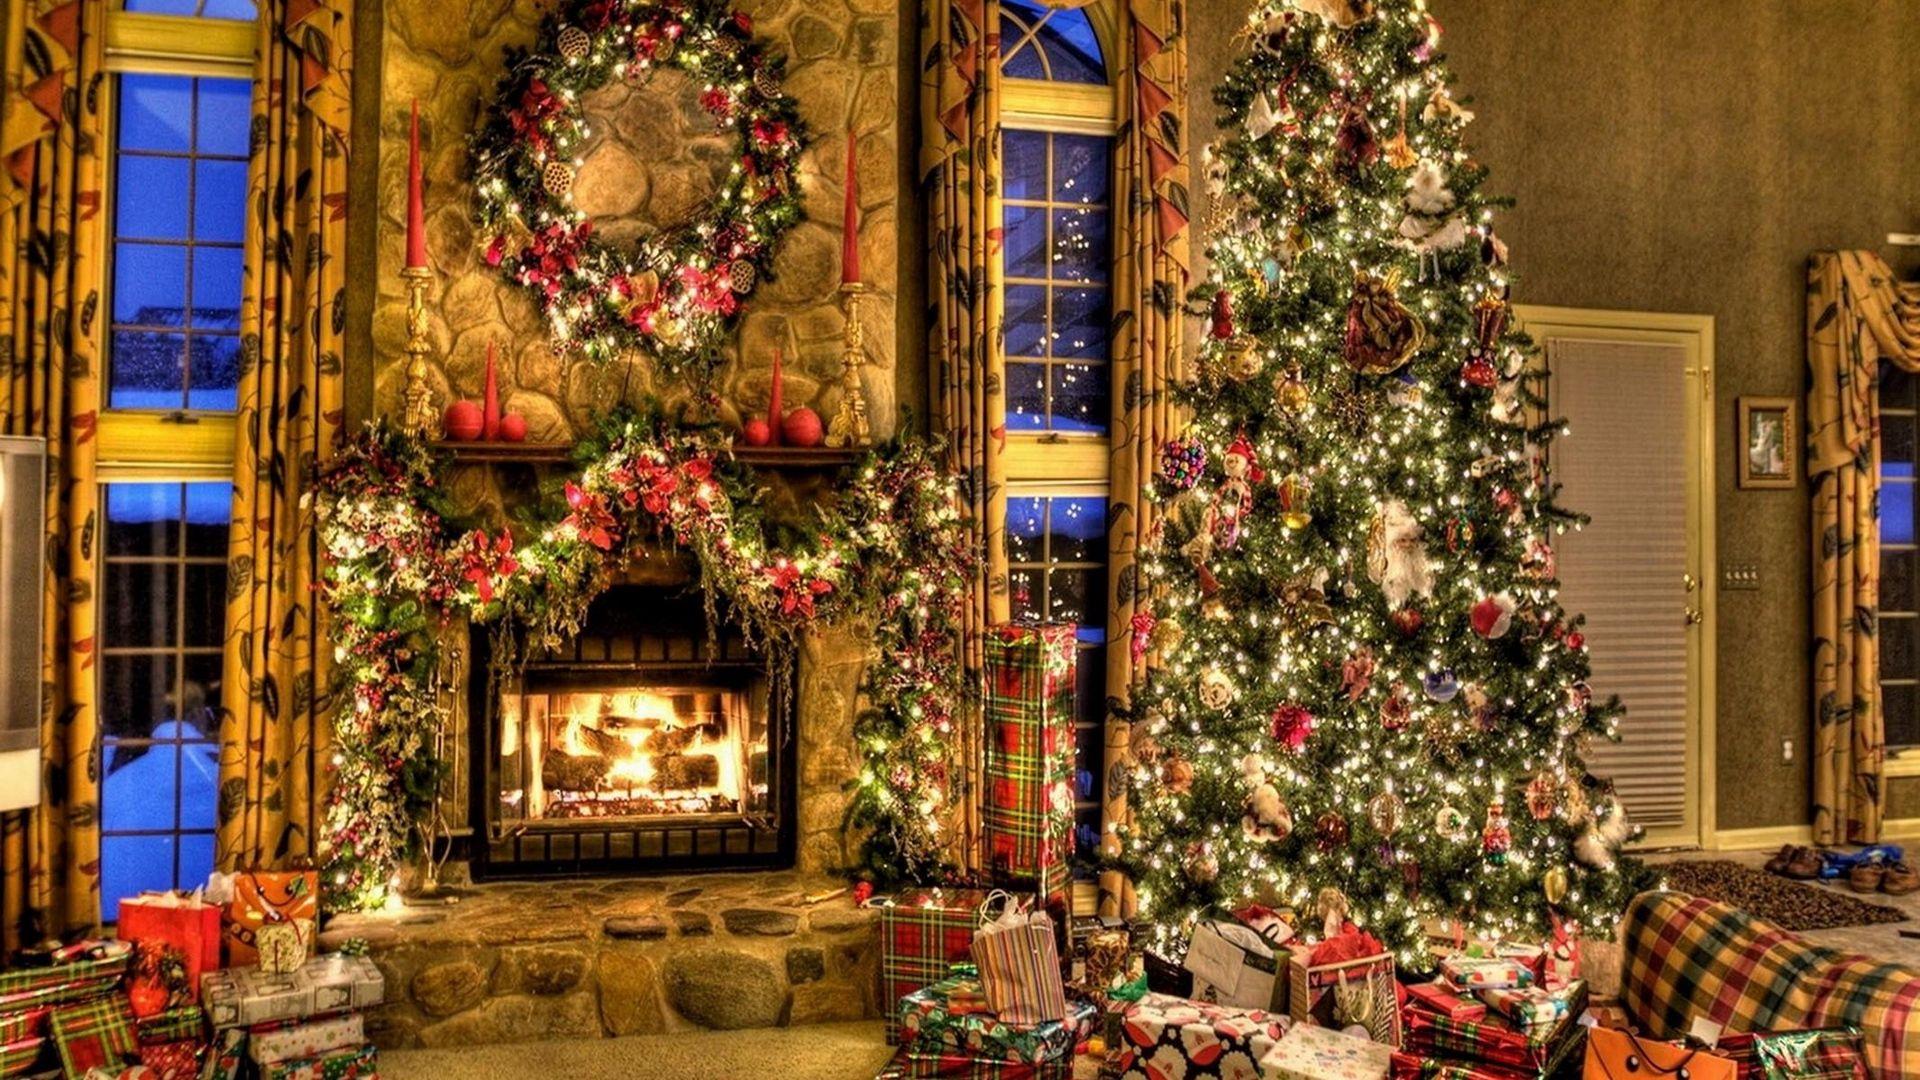 Download wallpaper 1920x1080 tree, christmas, presents, fireplace